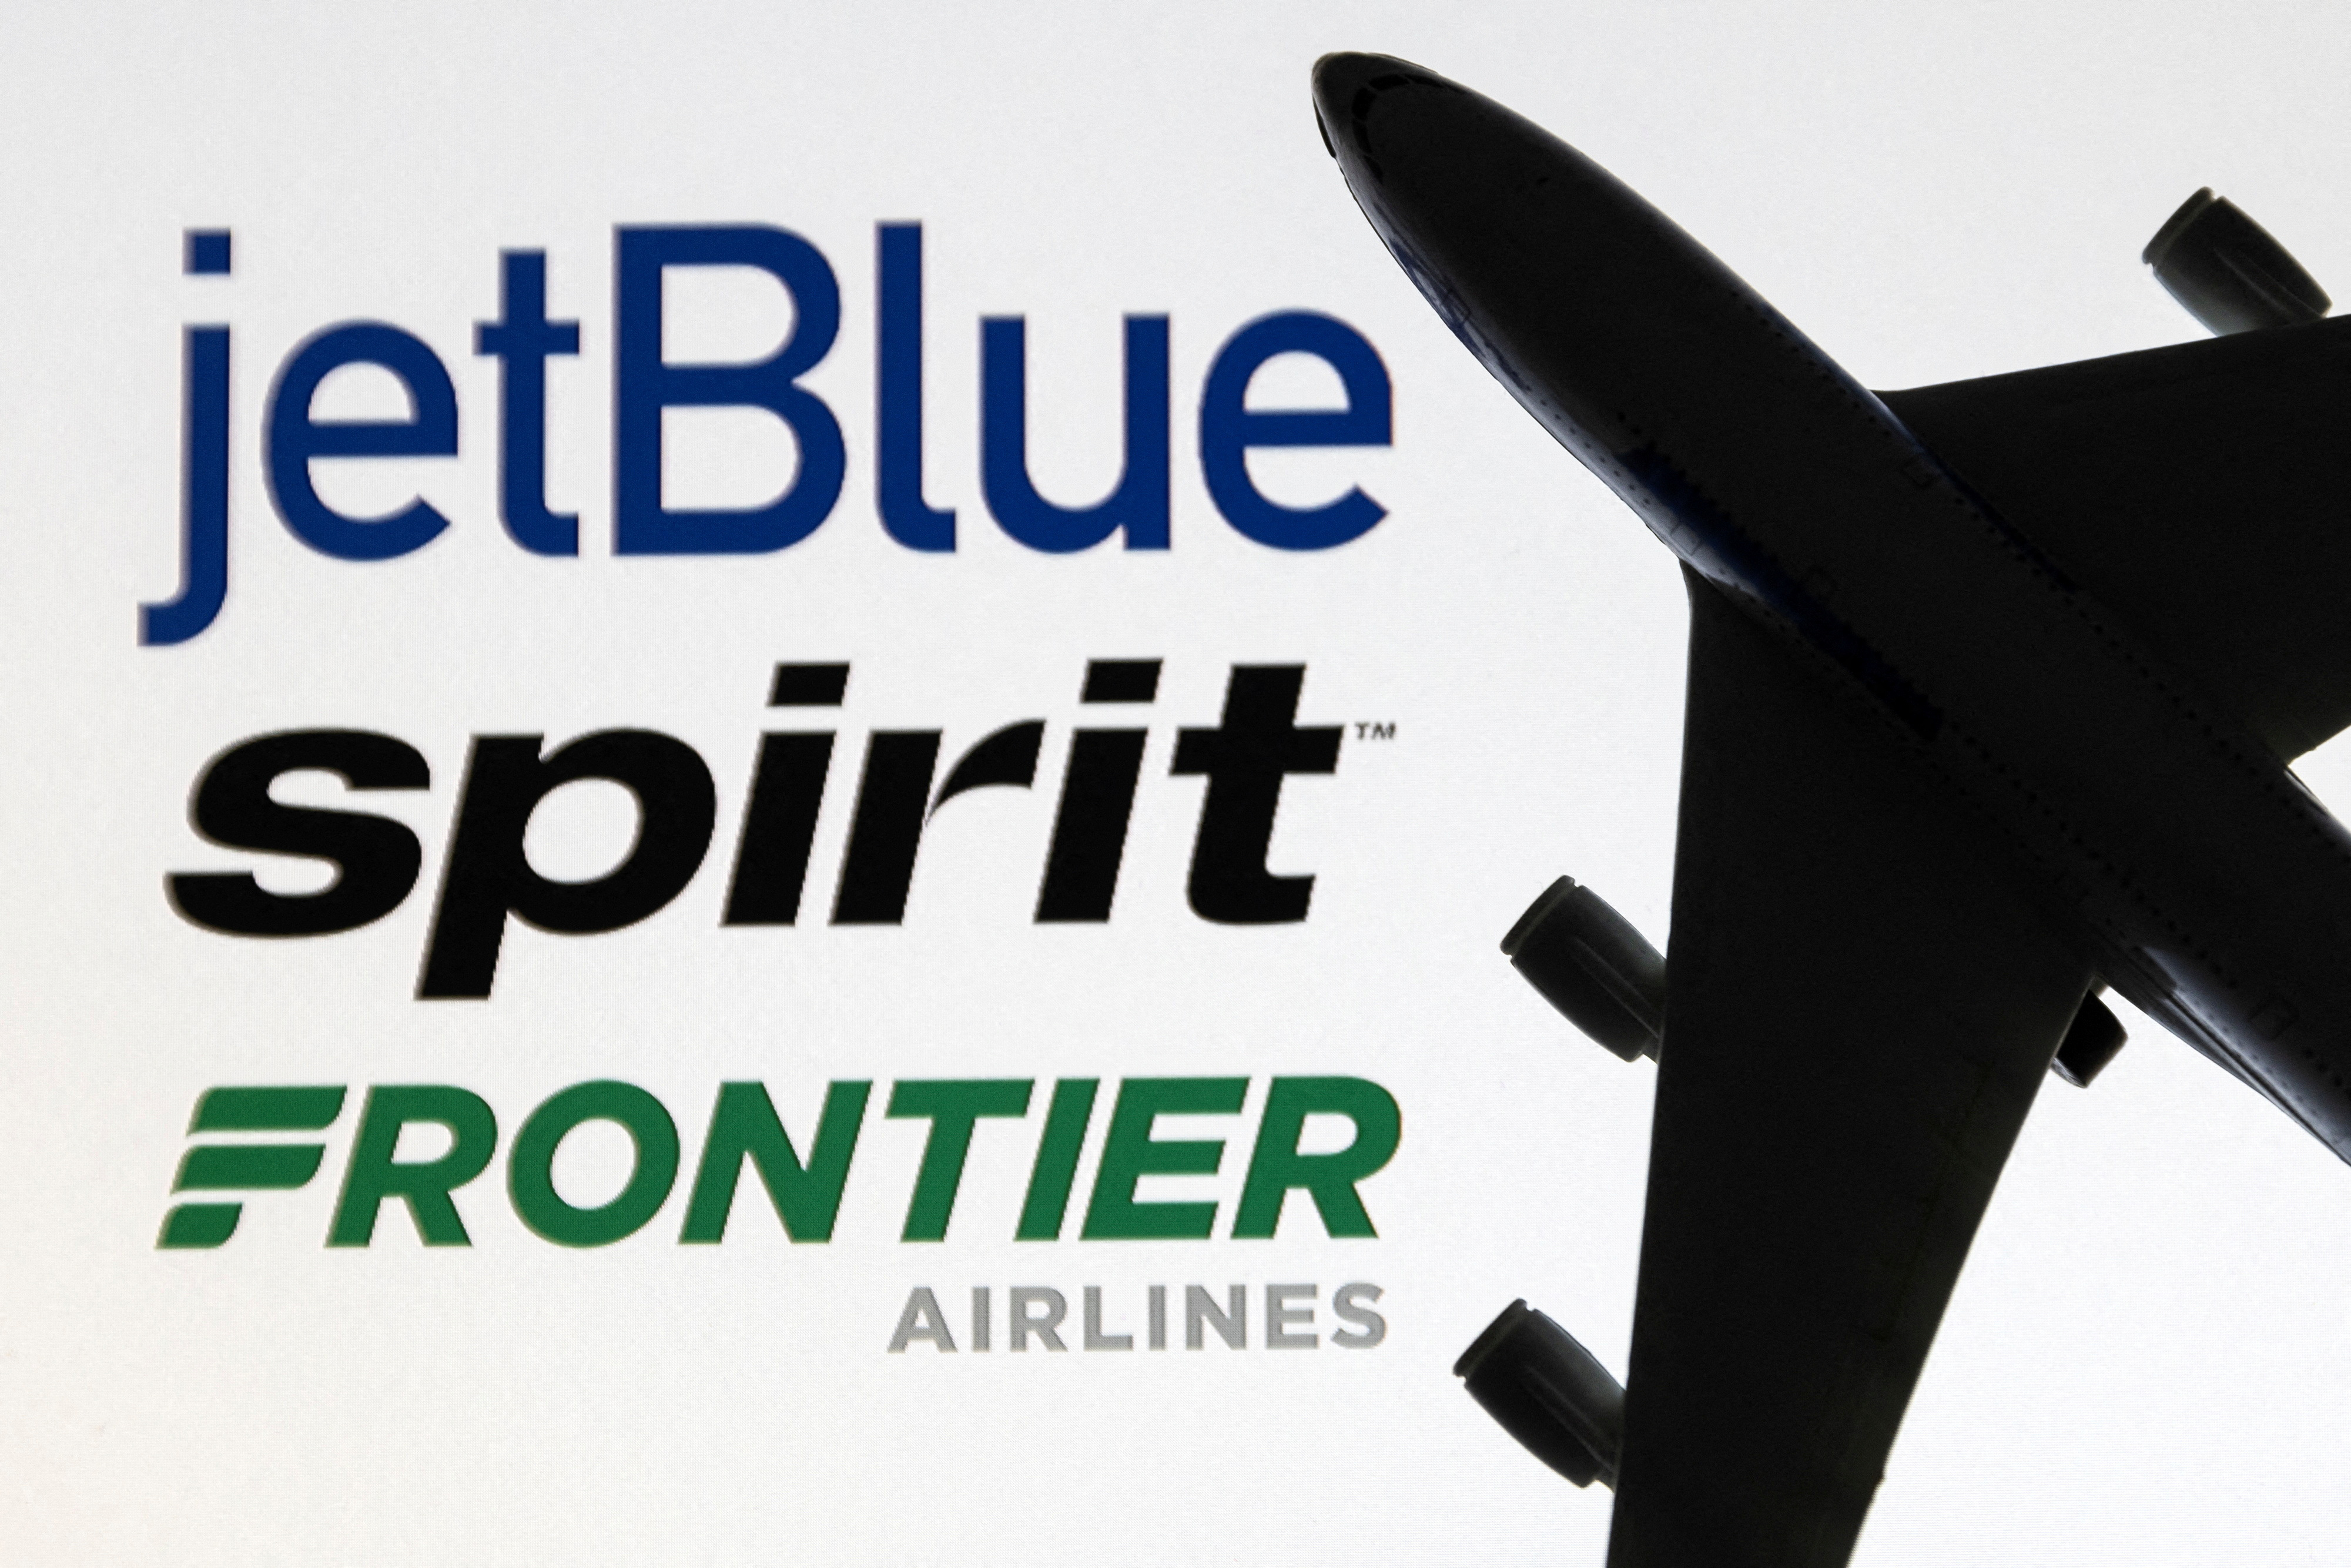 Illustration shows JetBlue, Spirit and Frontier Airlines logos